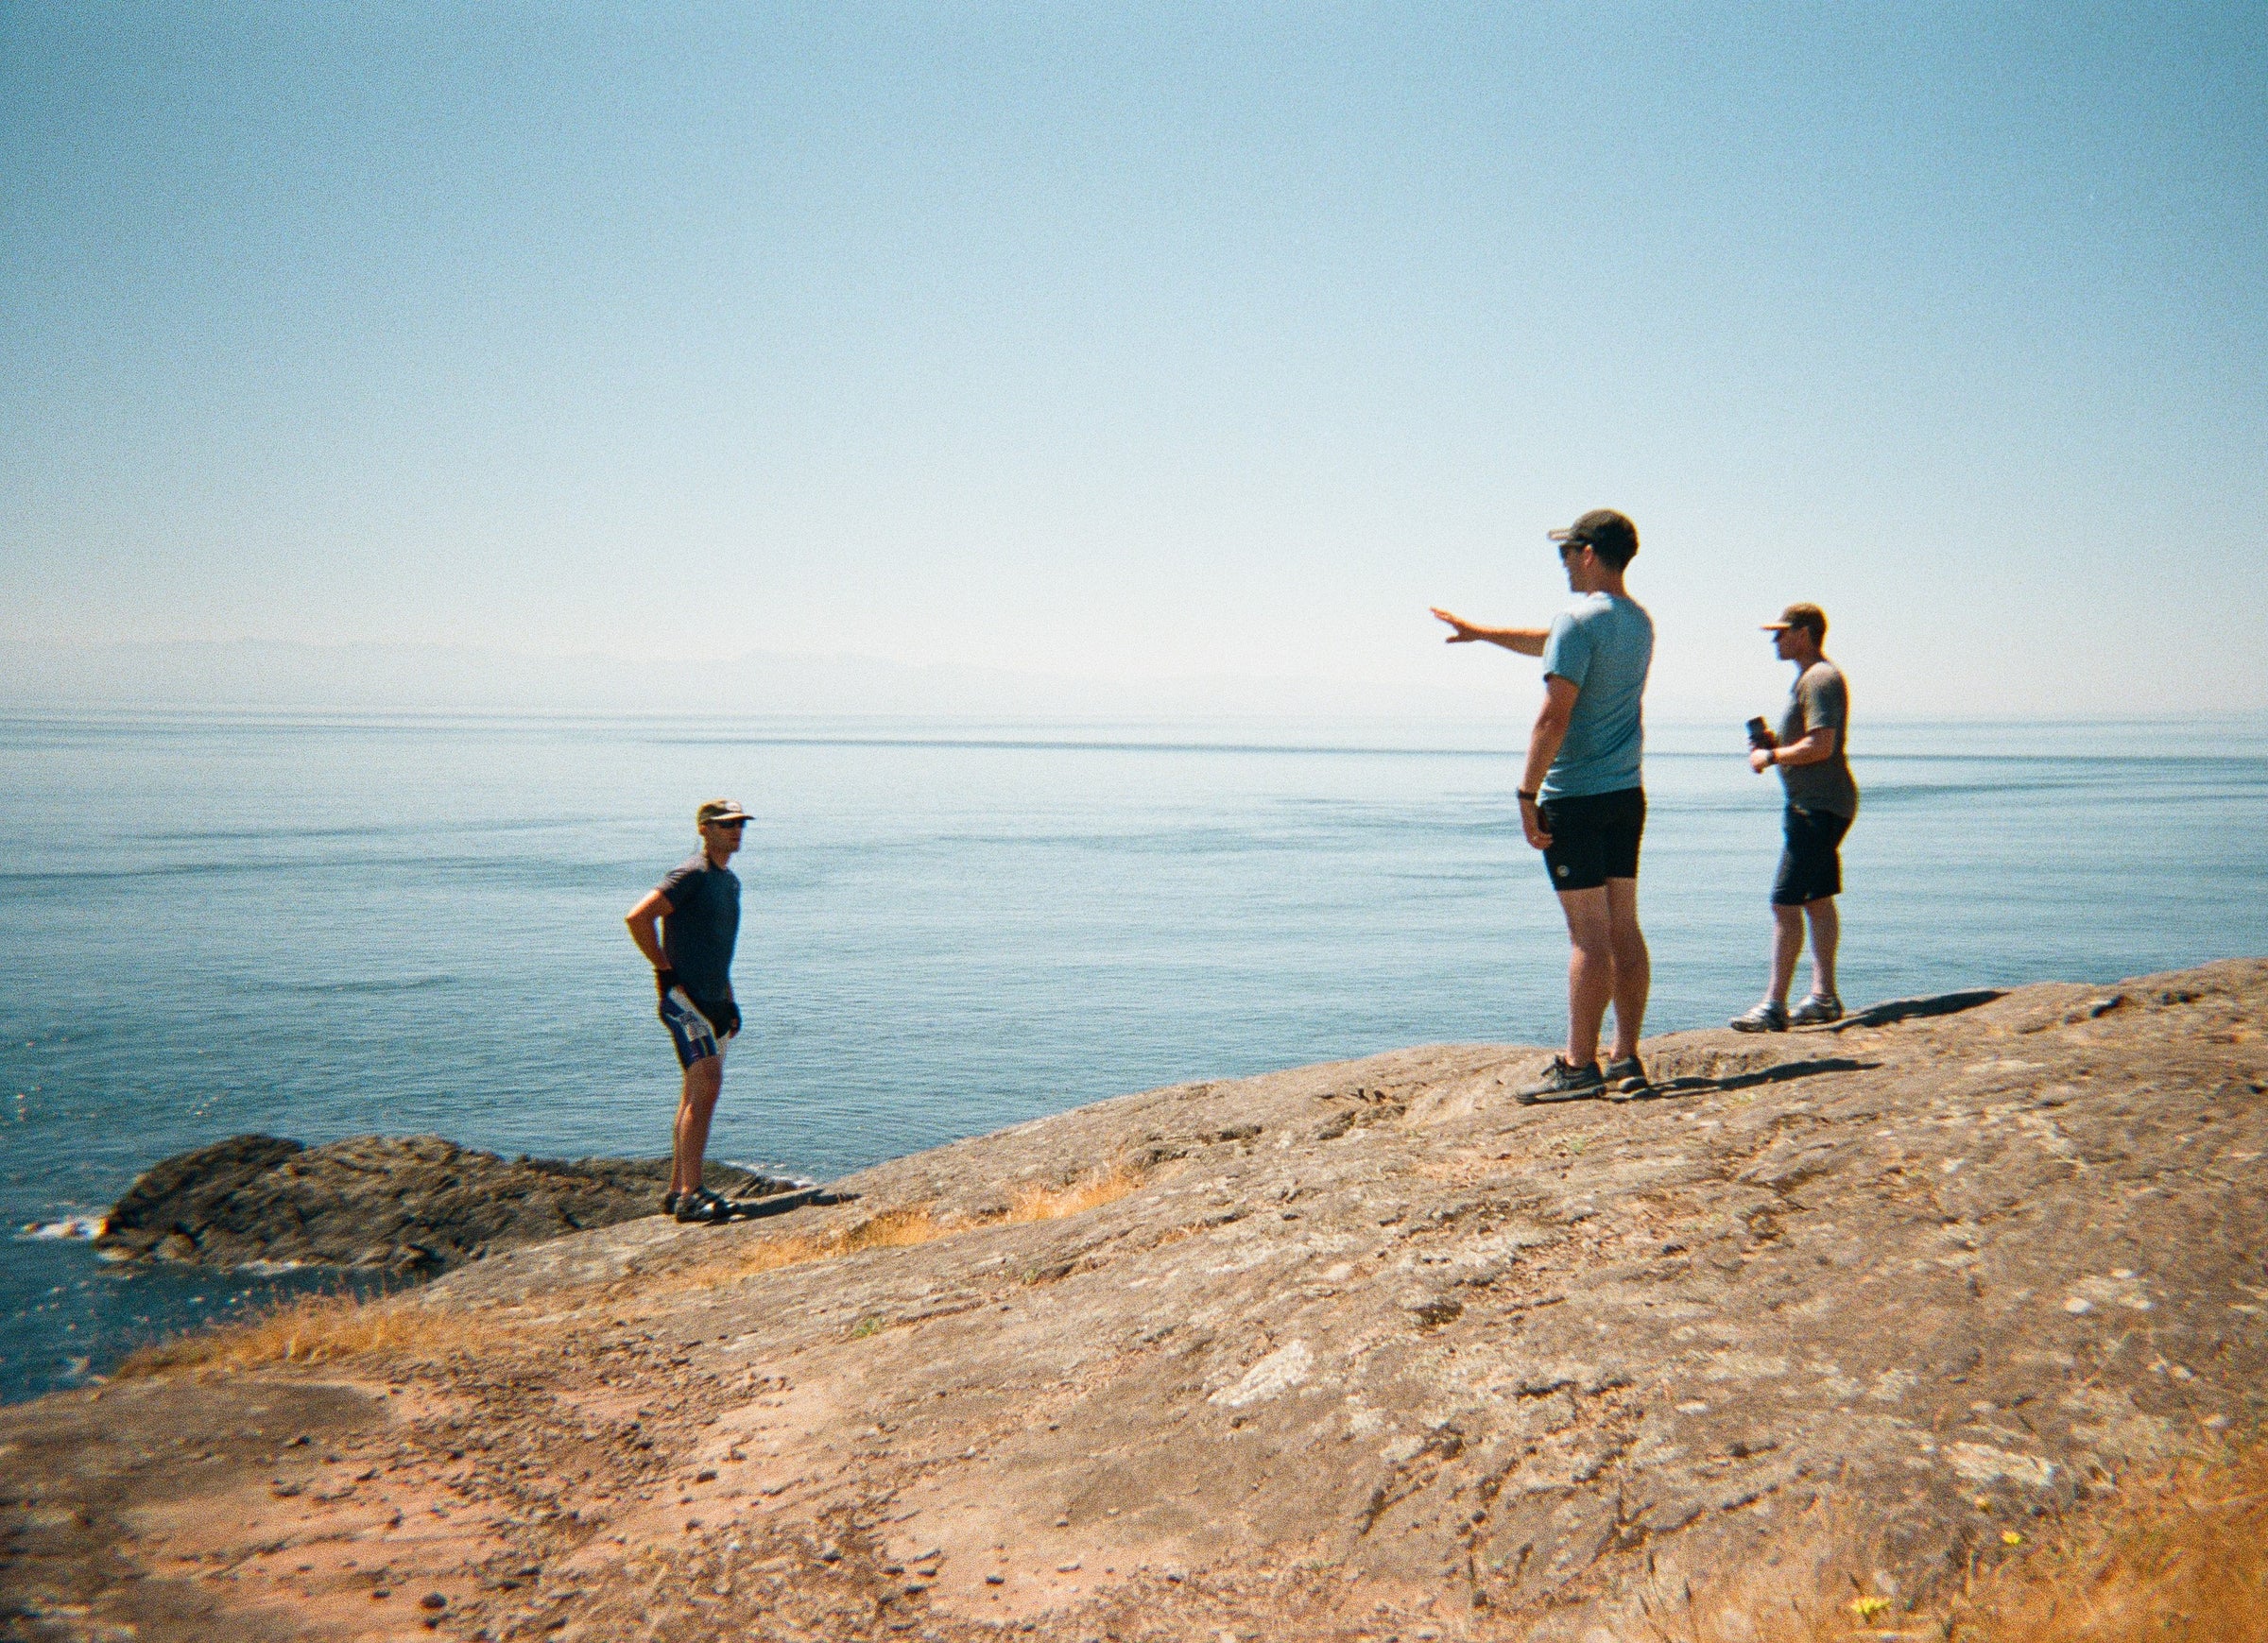 The guys hanging out at Iceberg Point on Lopez Island